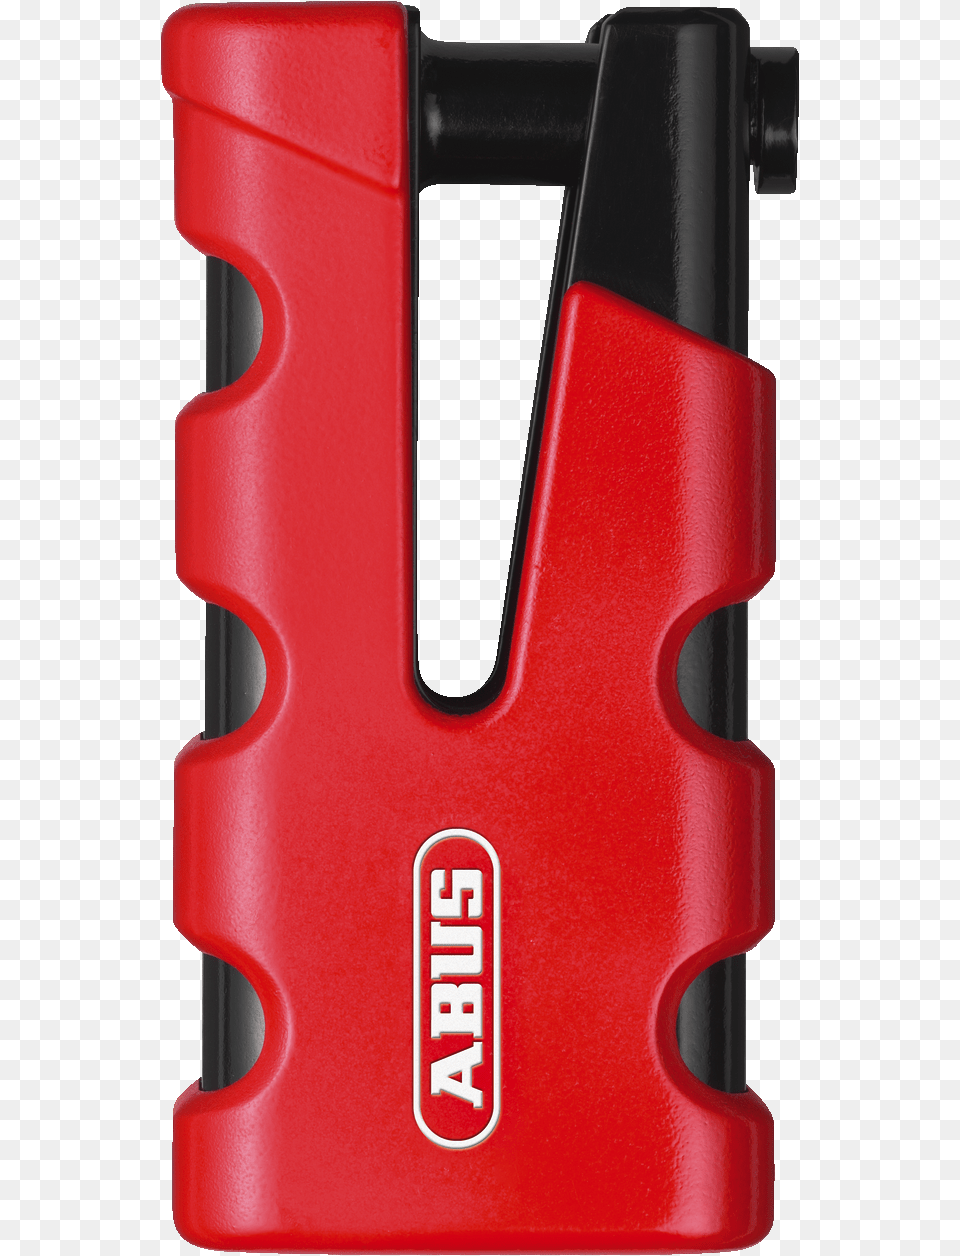 Abus Bike Disc Lock, Device, Fire Hydrant, Hydrant Png